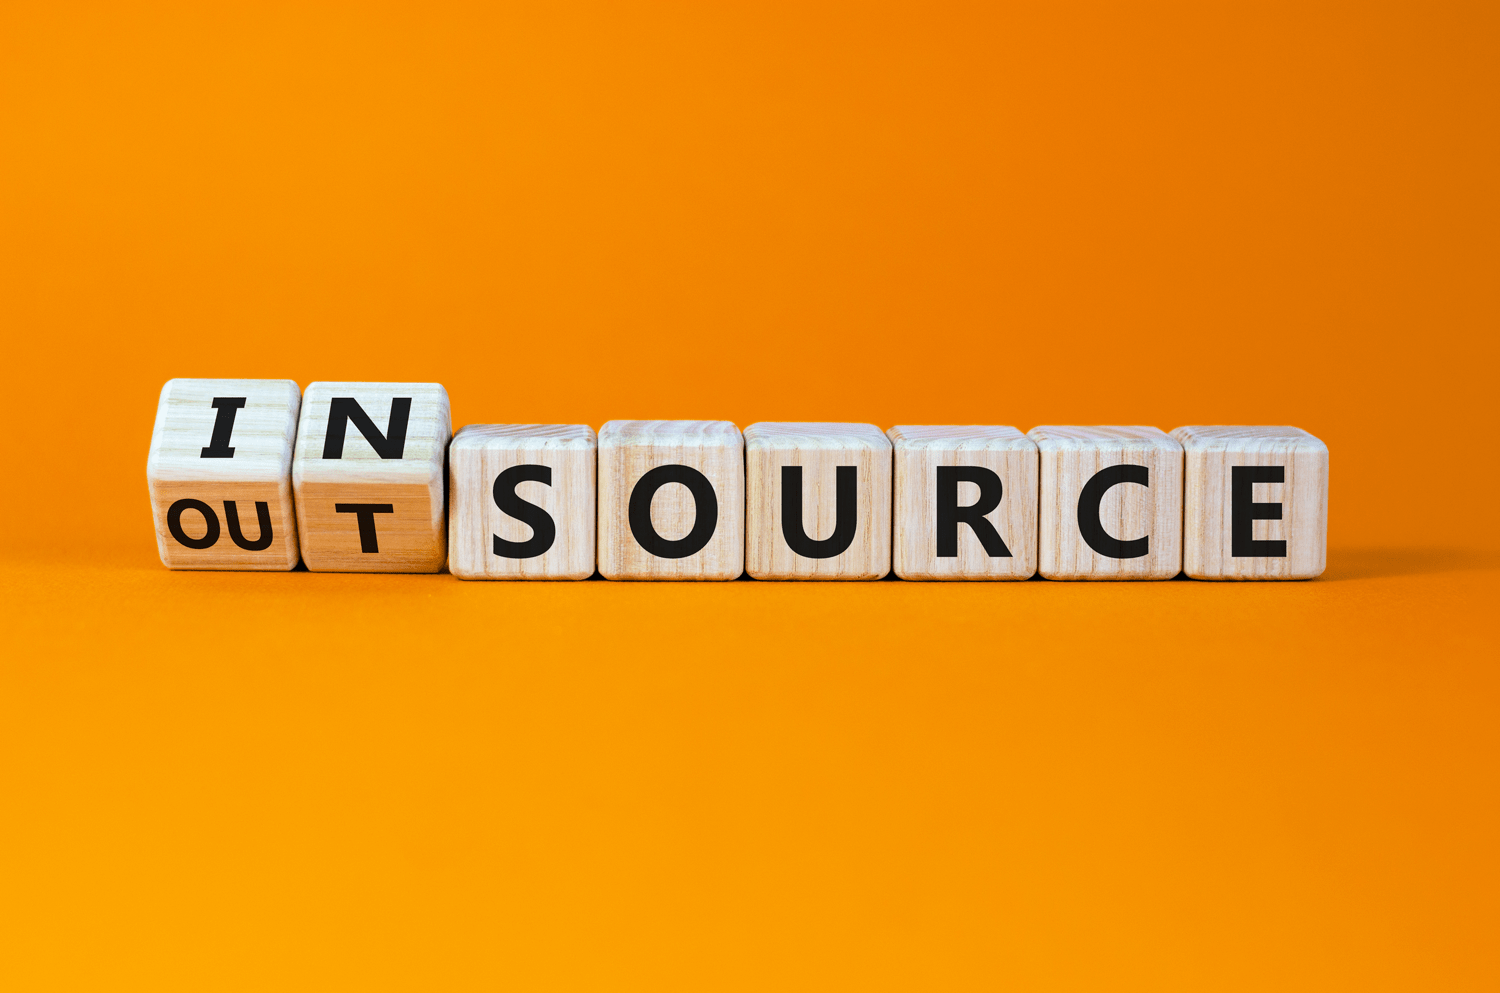 in-house versus outsourcing